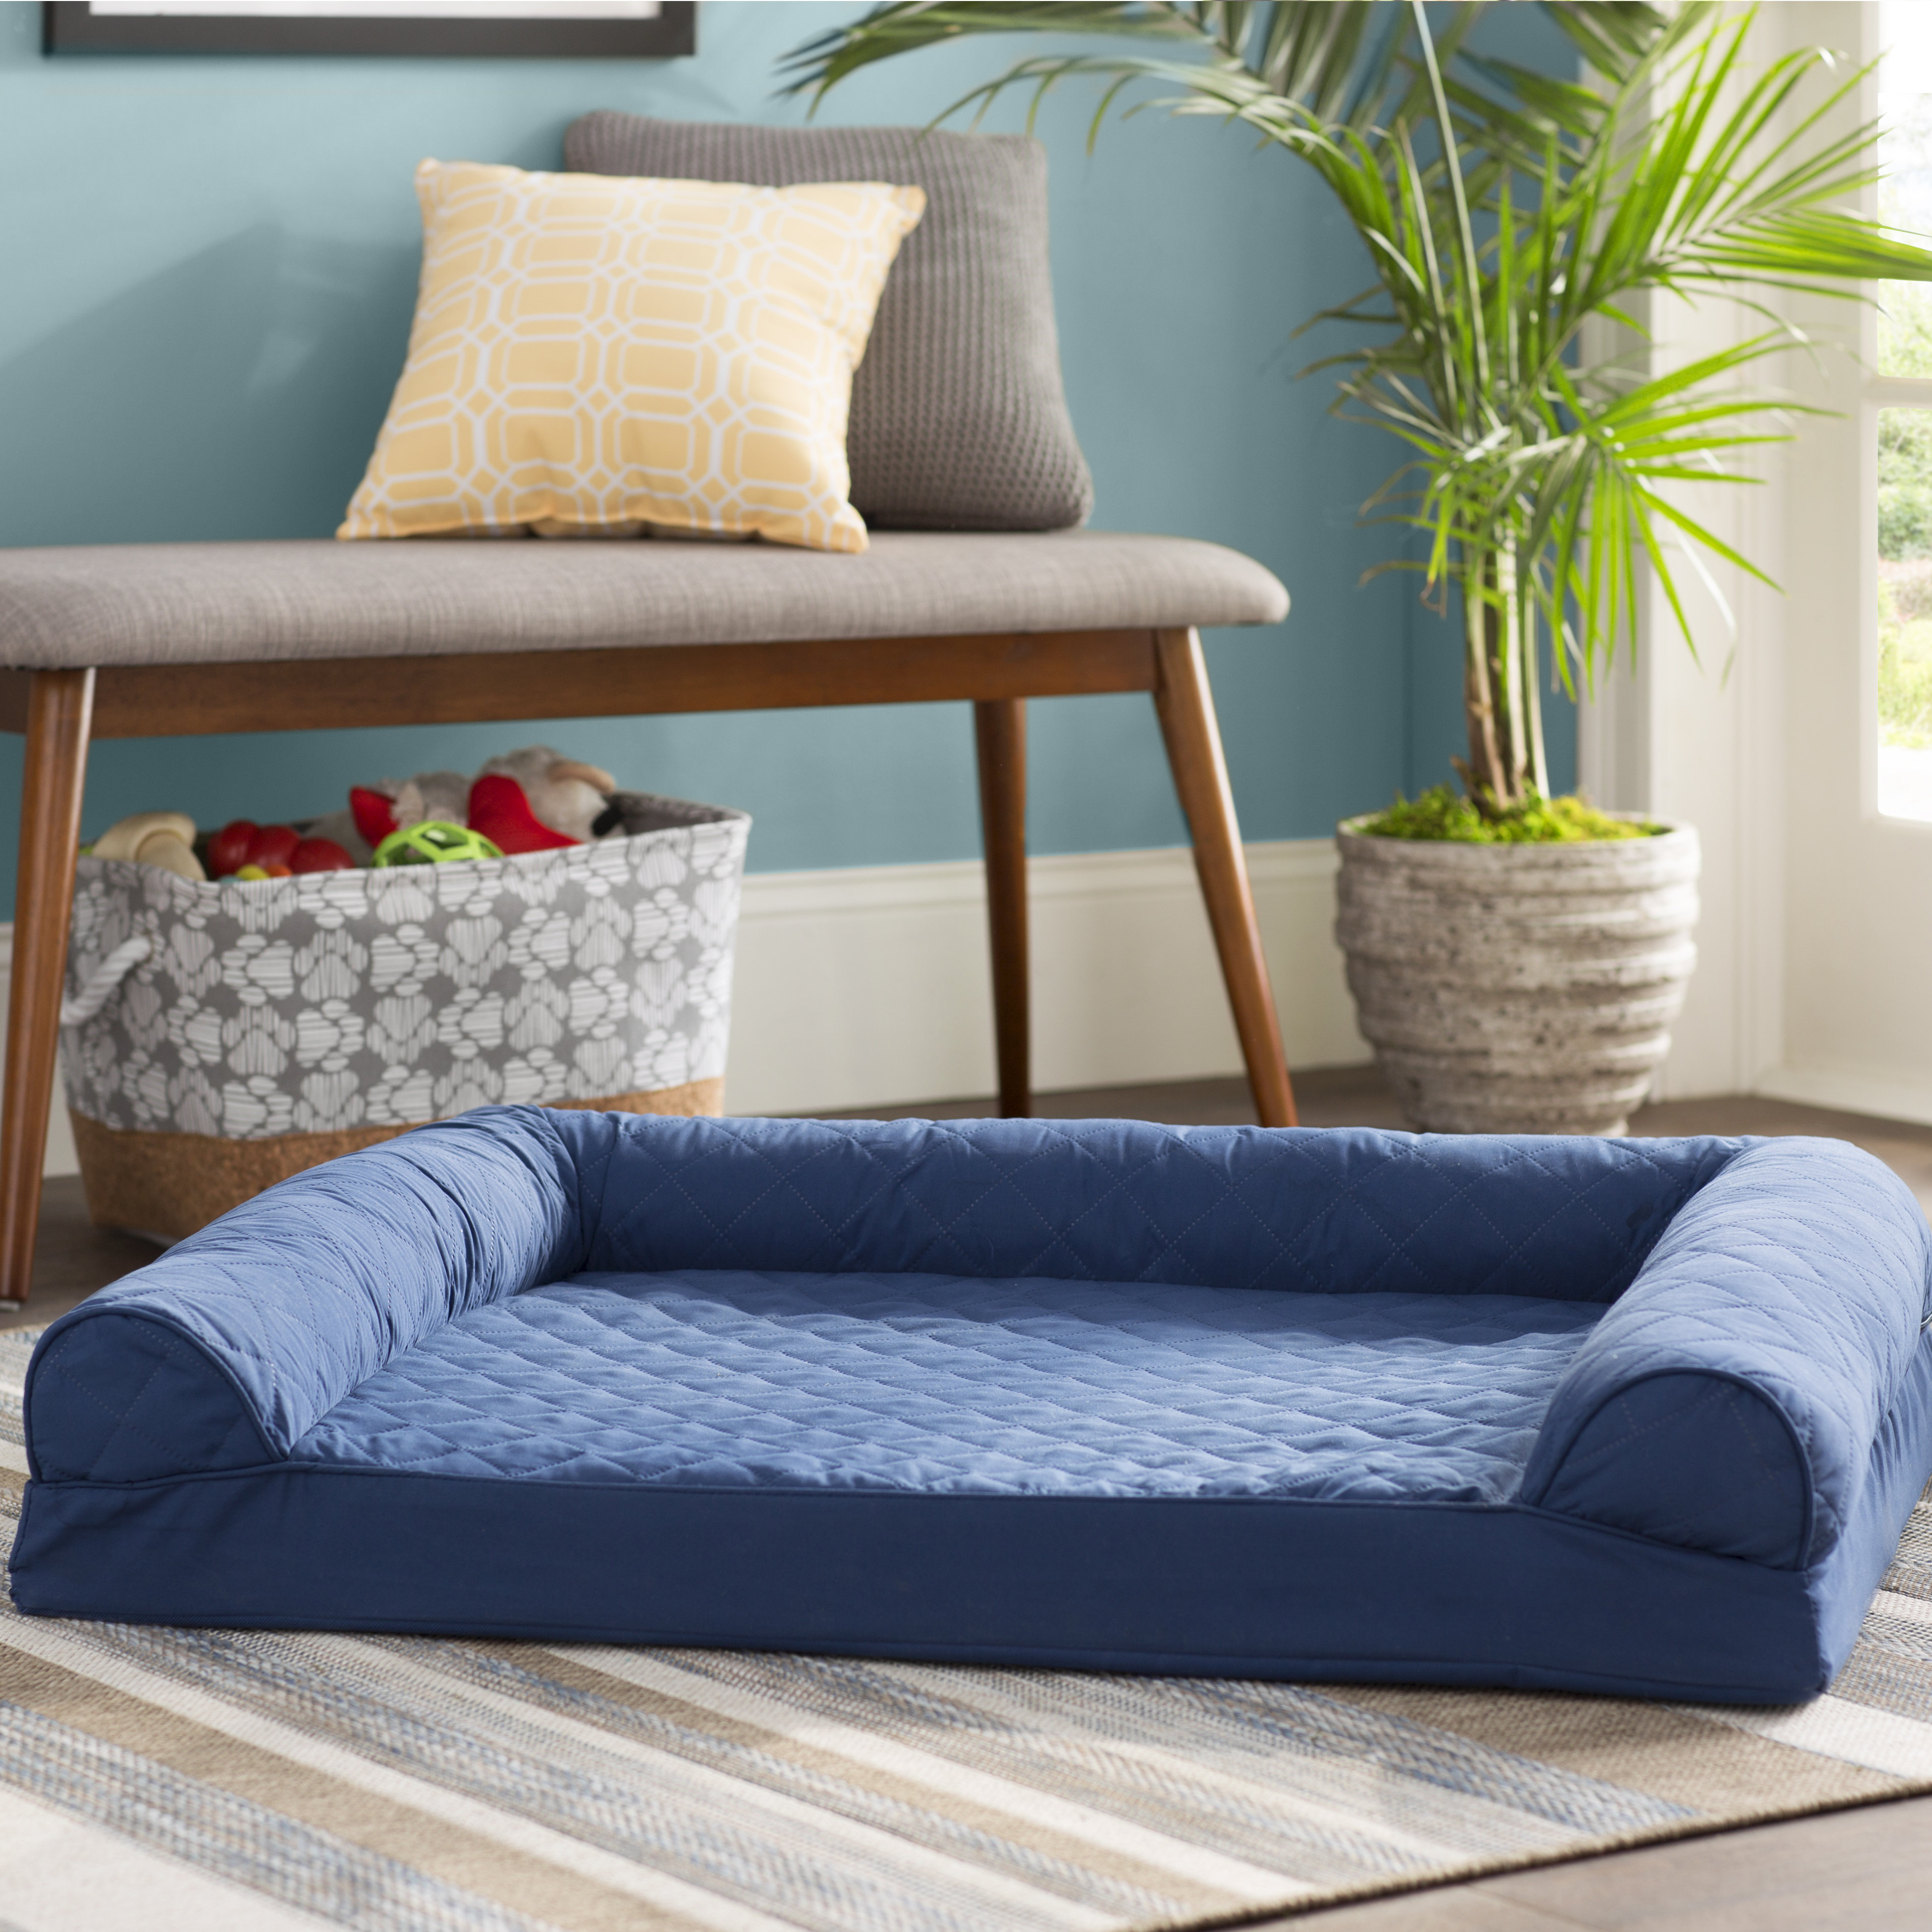 orthopedic dog couch bed